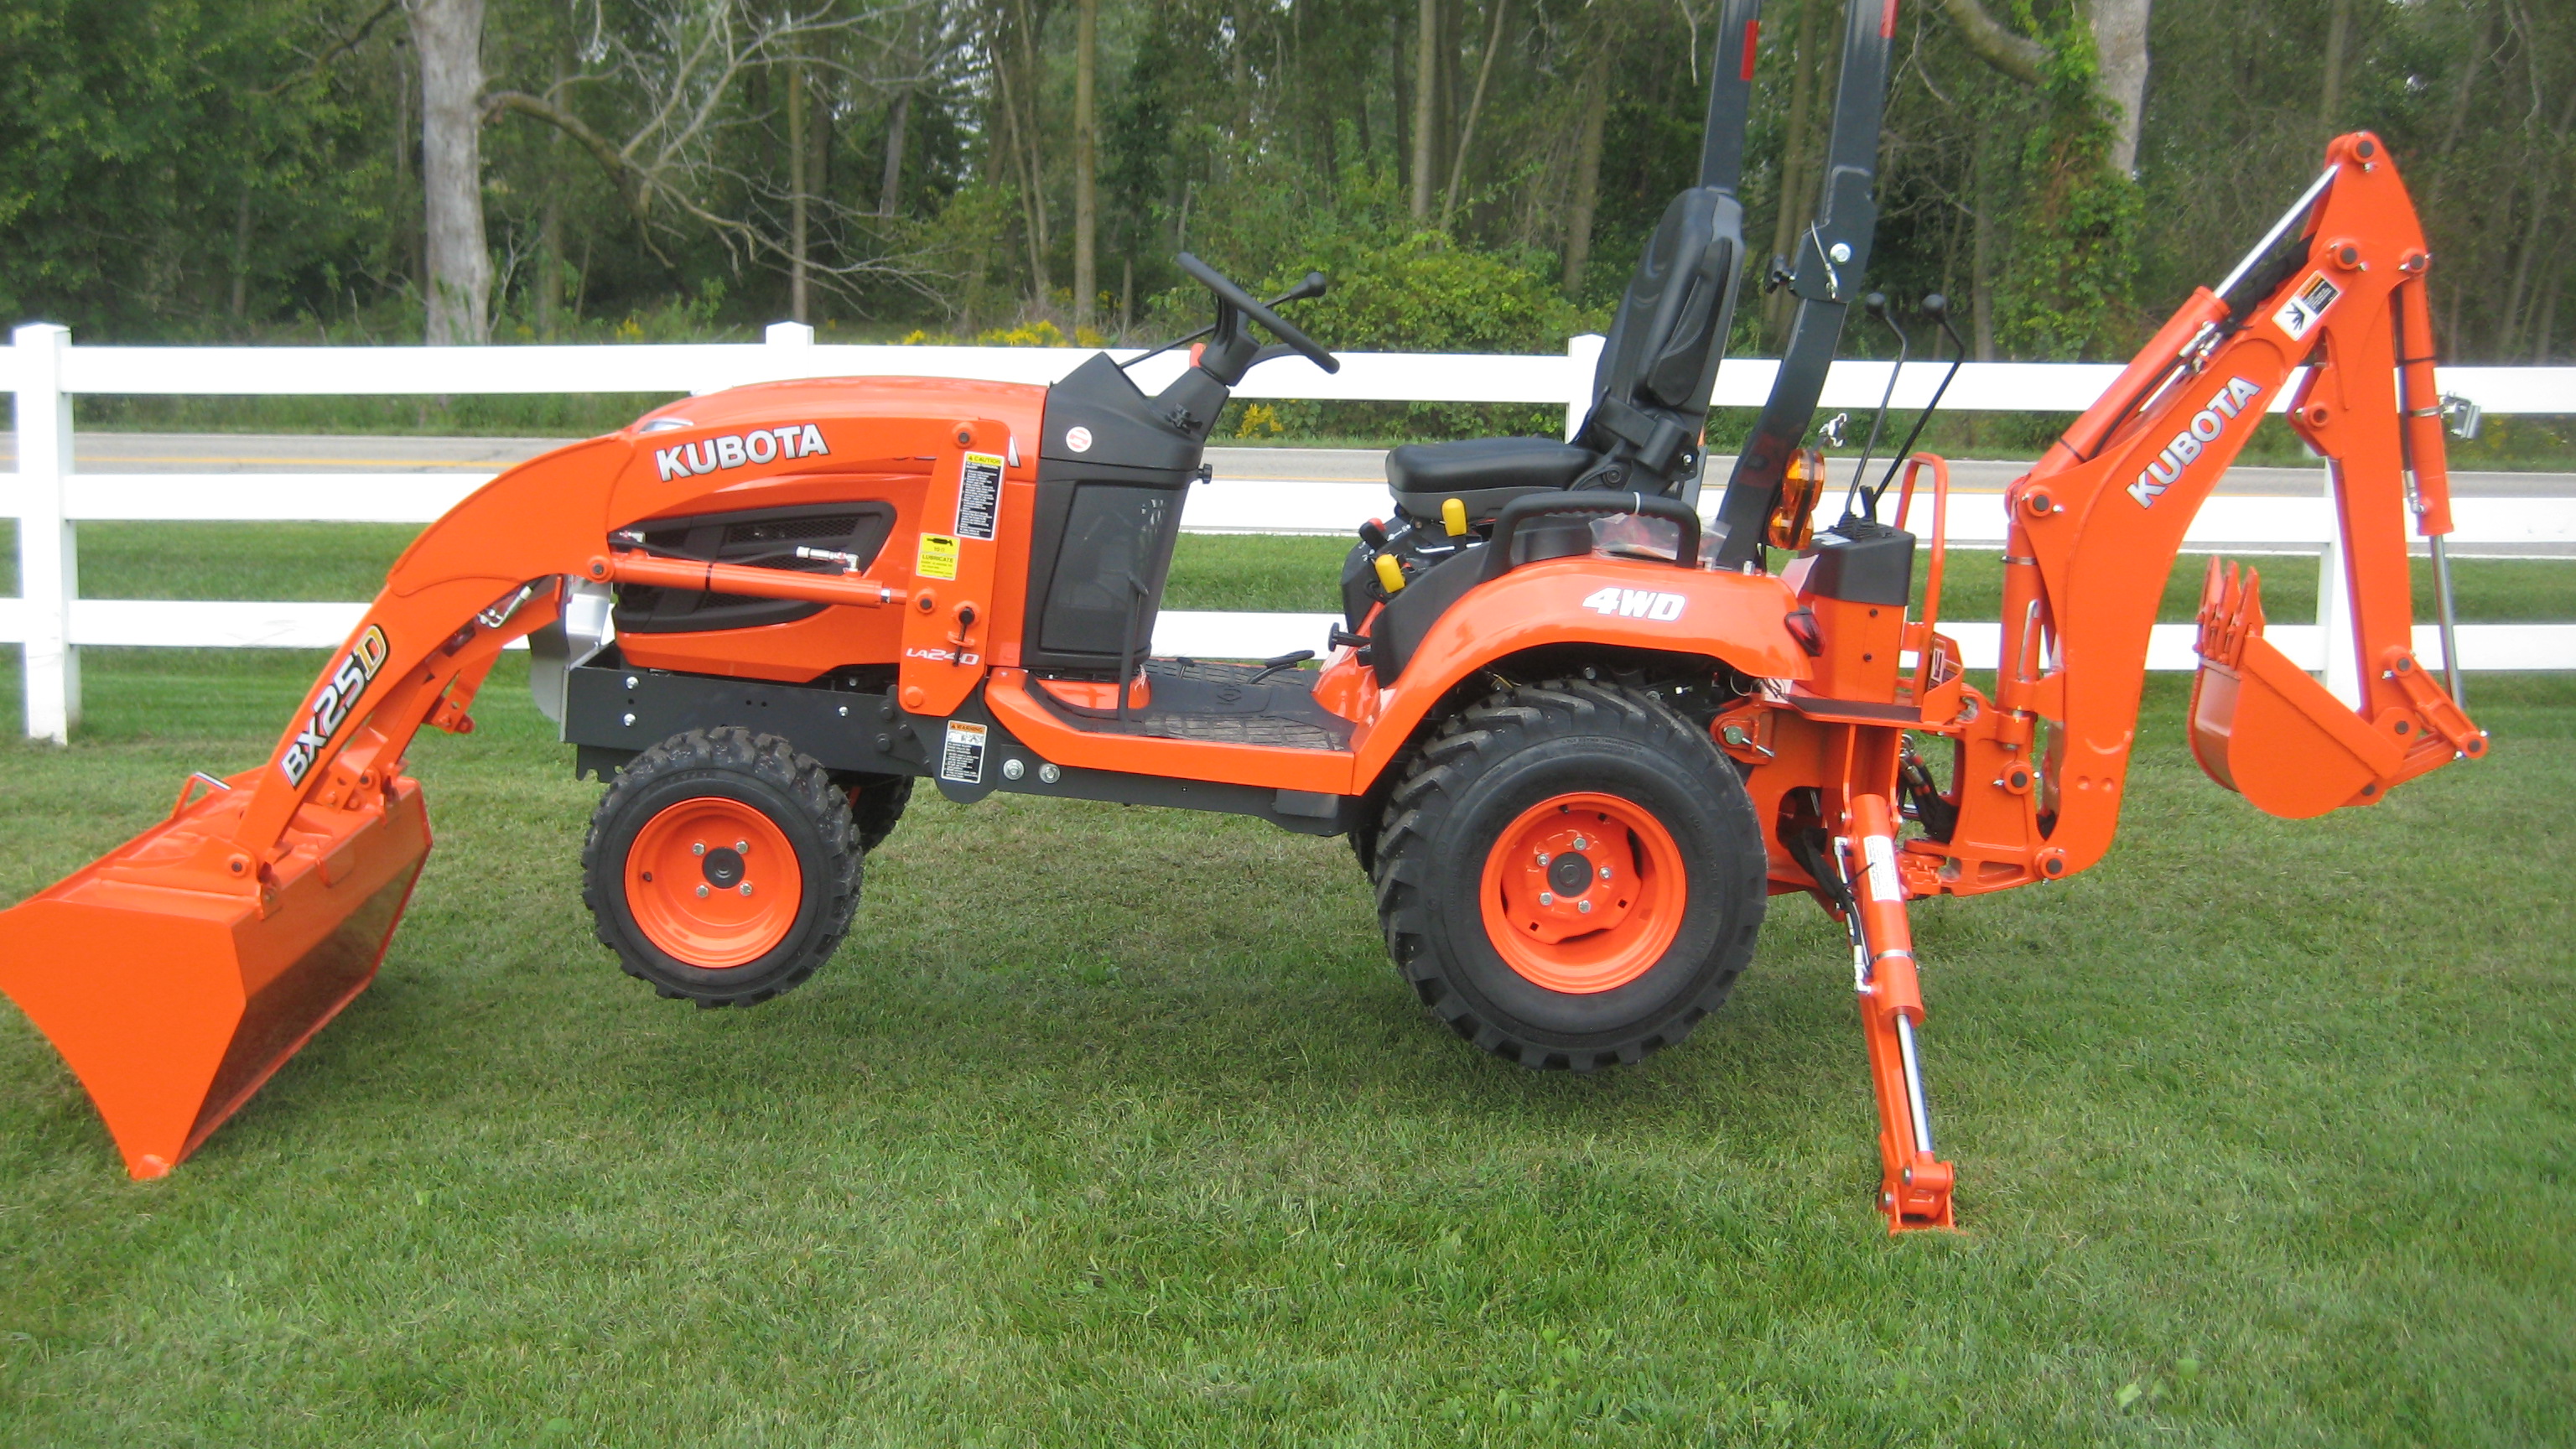 Kubota BX25D-1 Diesel Tractor in the Baltimore and Surrounding Areas